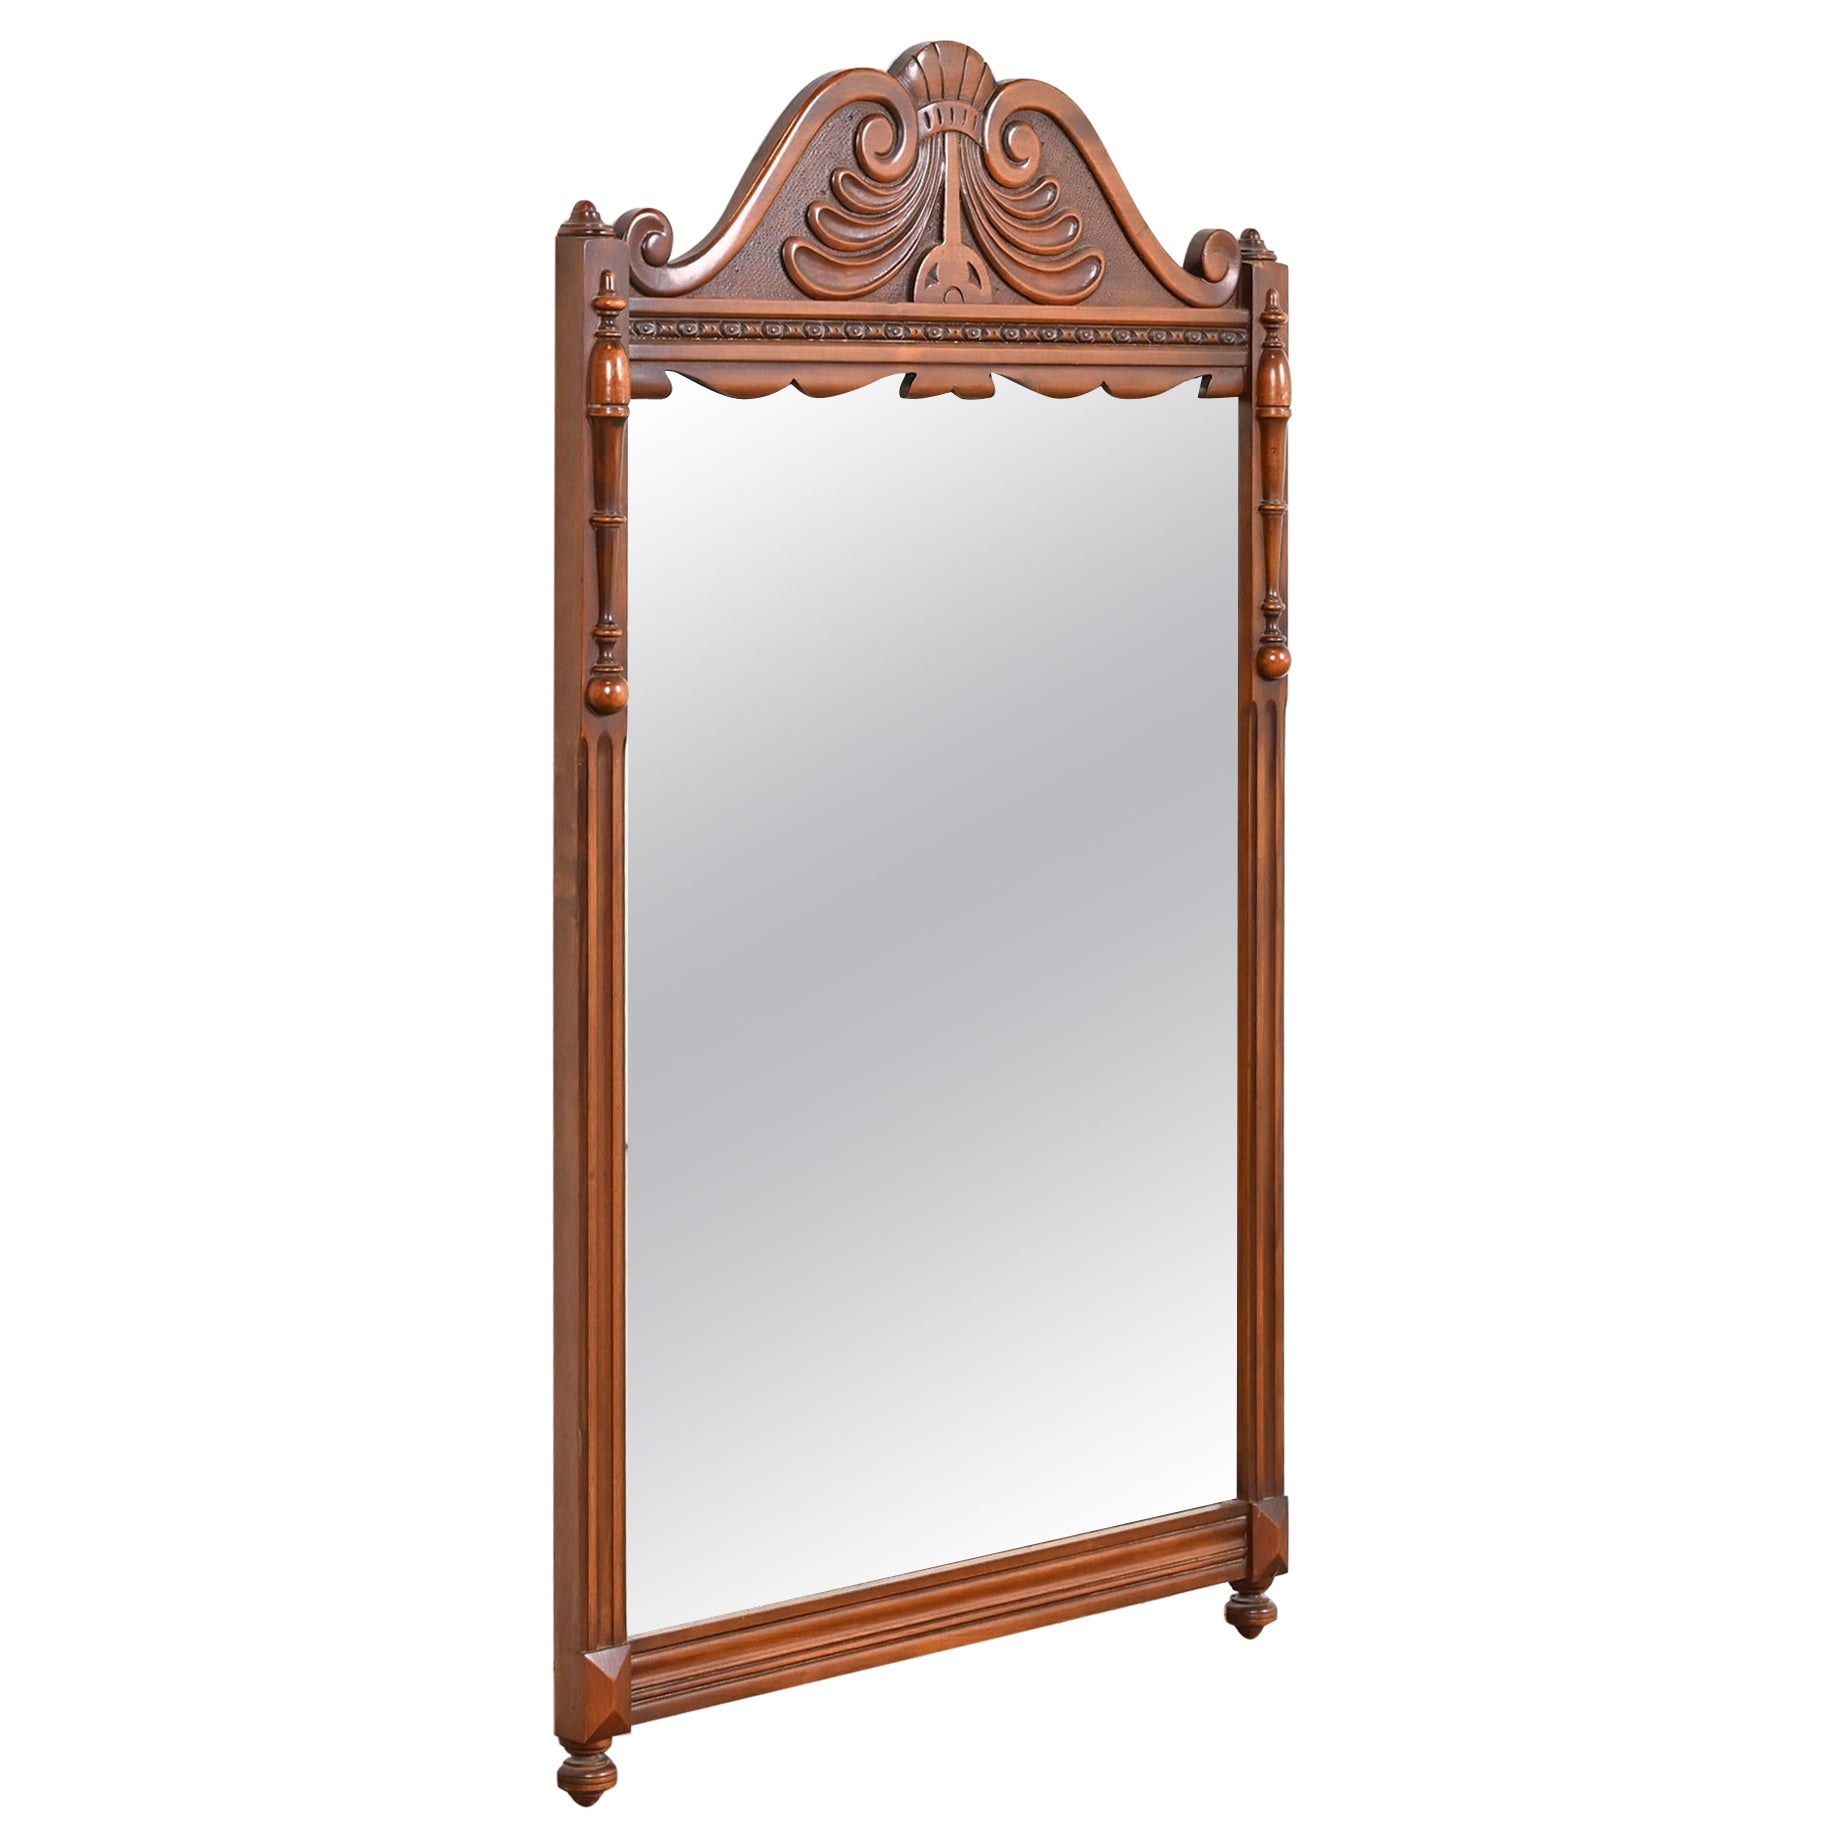 French Art Deco Carved Walnut Wall Mirror by Landstrom, Circa 1940s For Sale